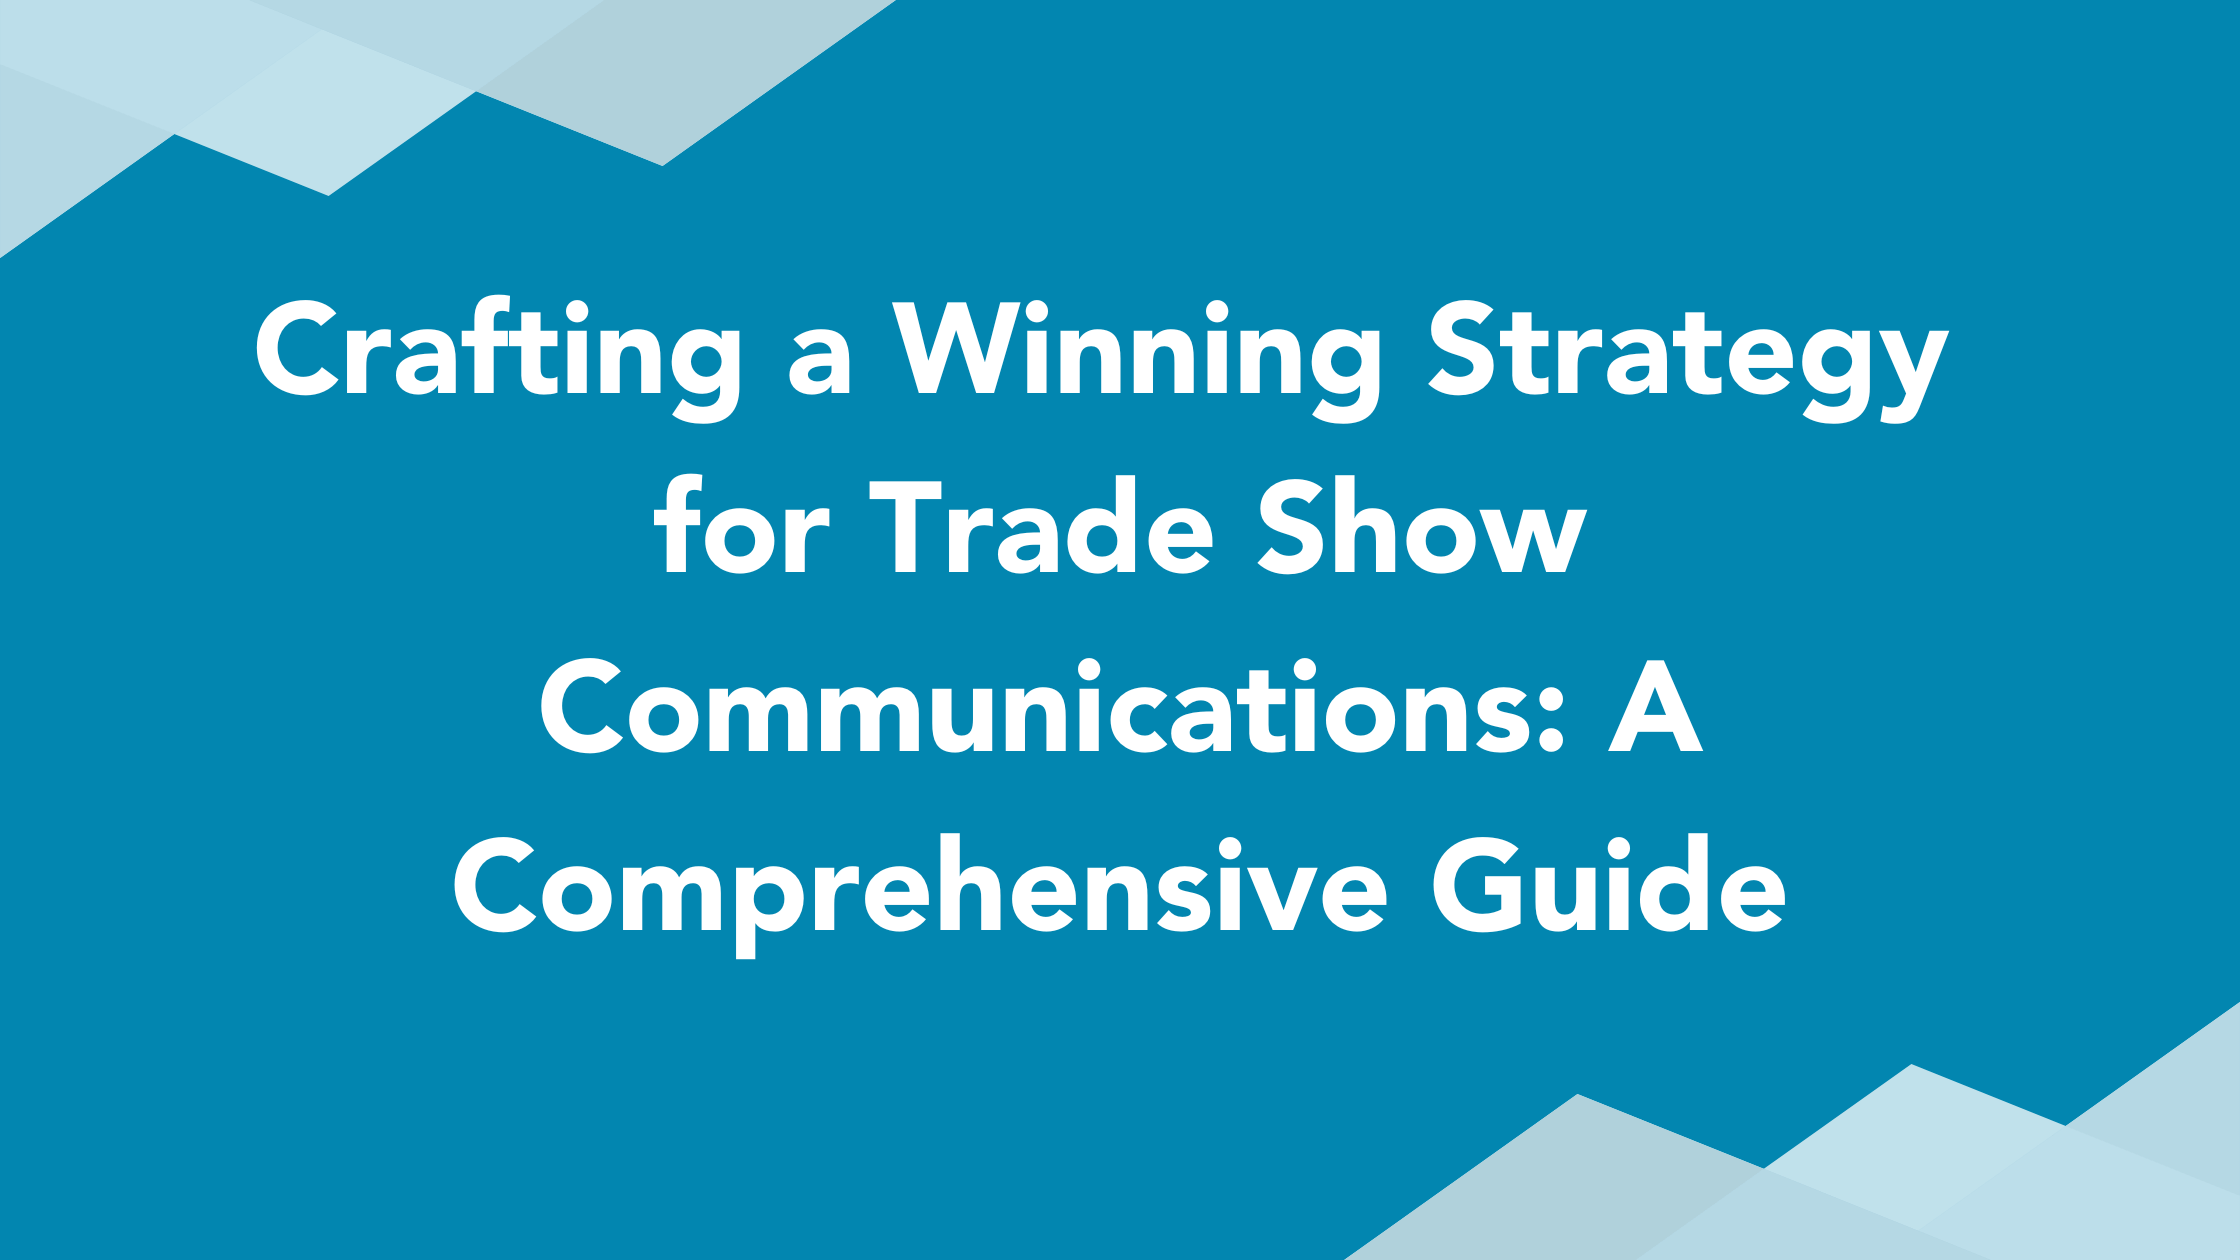 Crafting a Winning Trade Show Communications Strategy